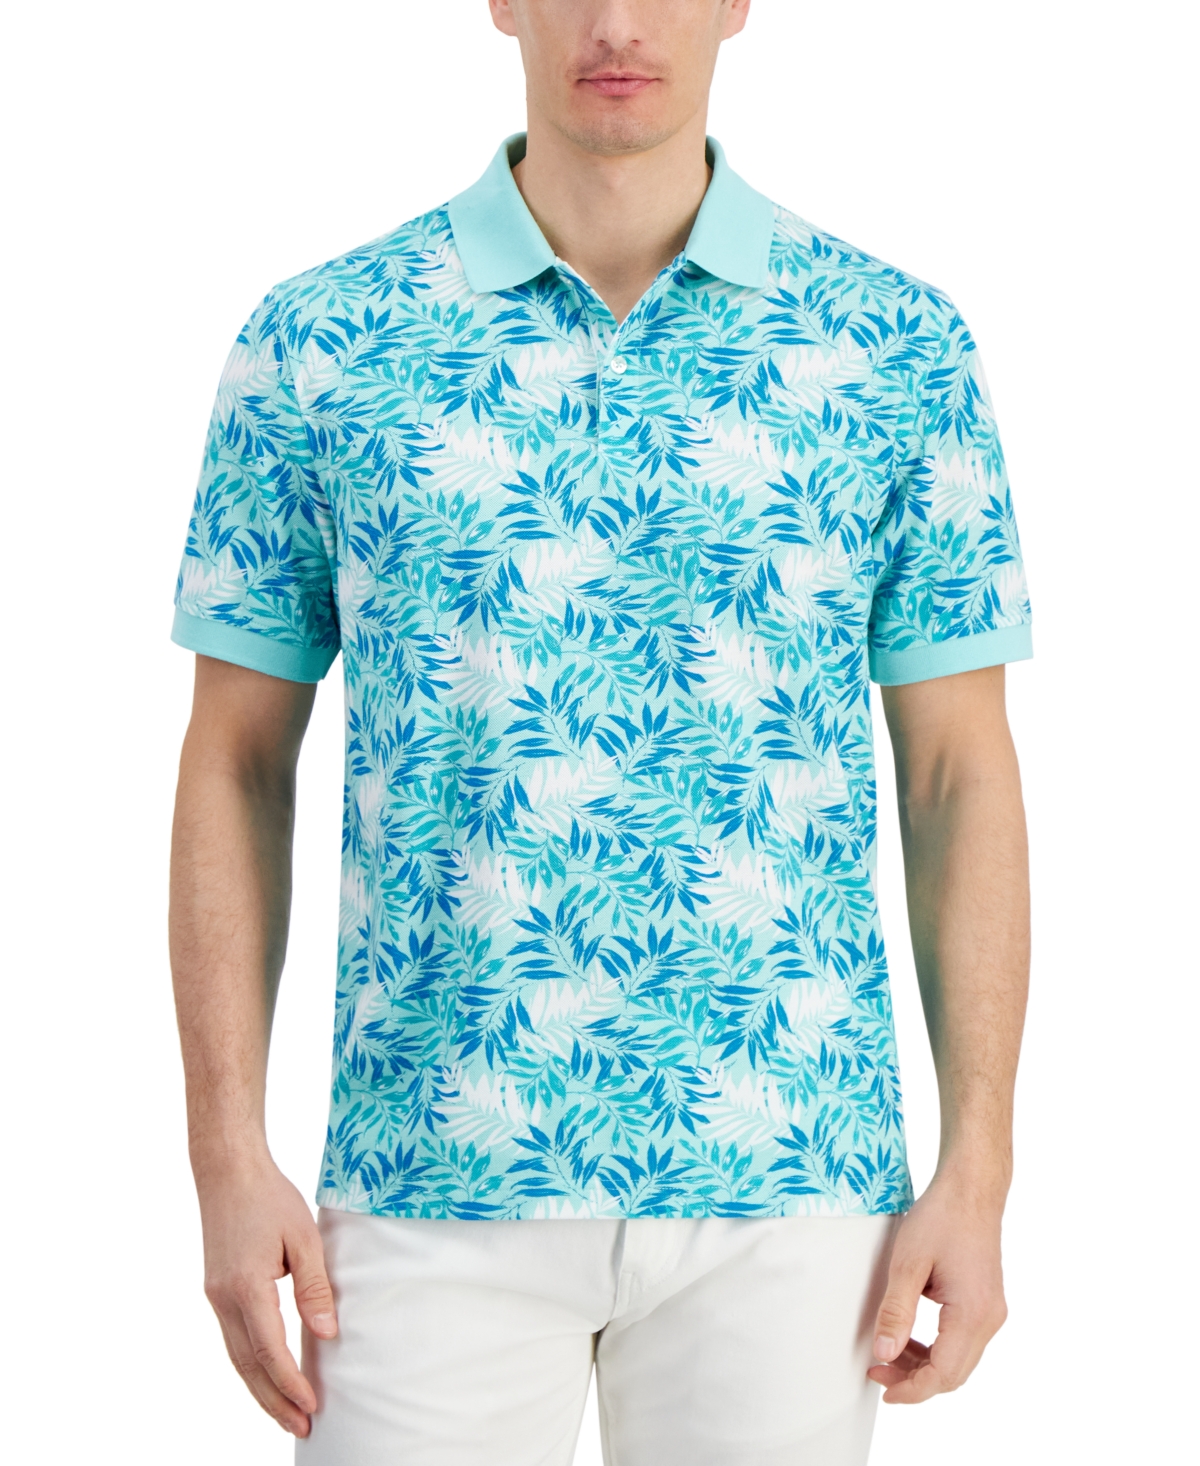 Men's Dello Textured Short Sleeve Leaf-Print Performance Polo Shirt, Created for Macy's - Sprint Mint